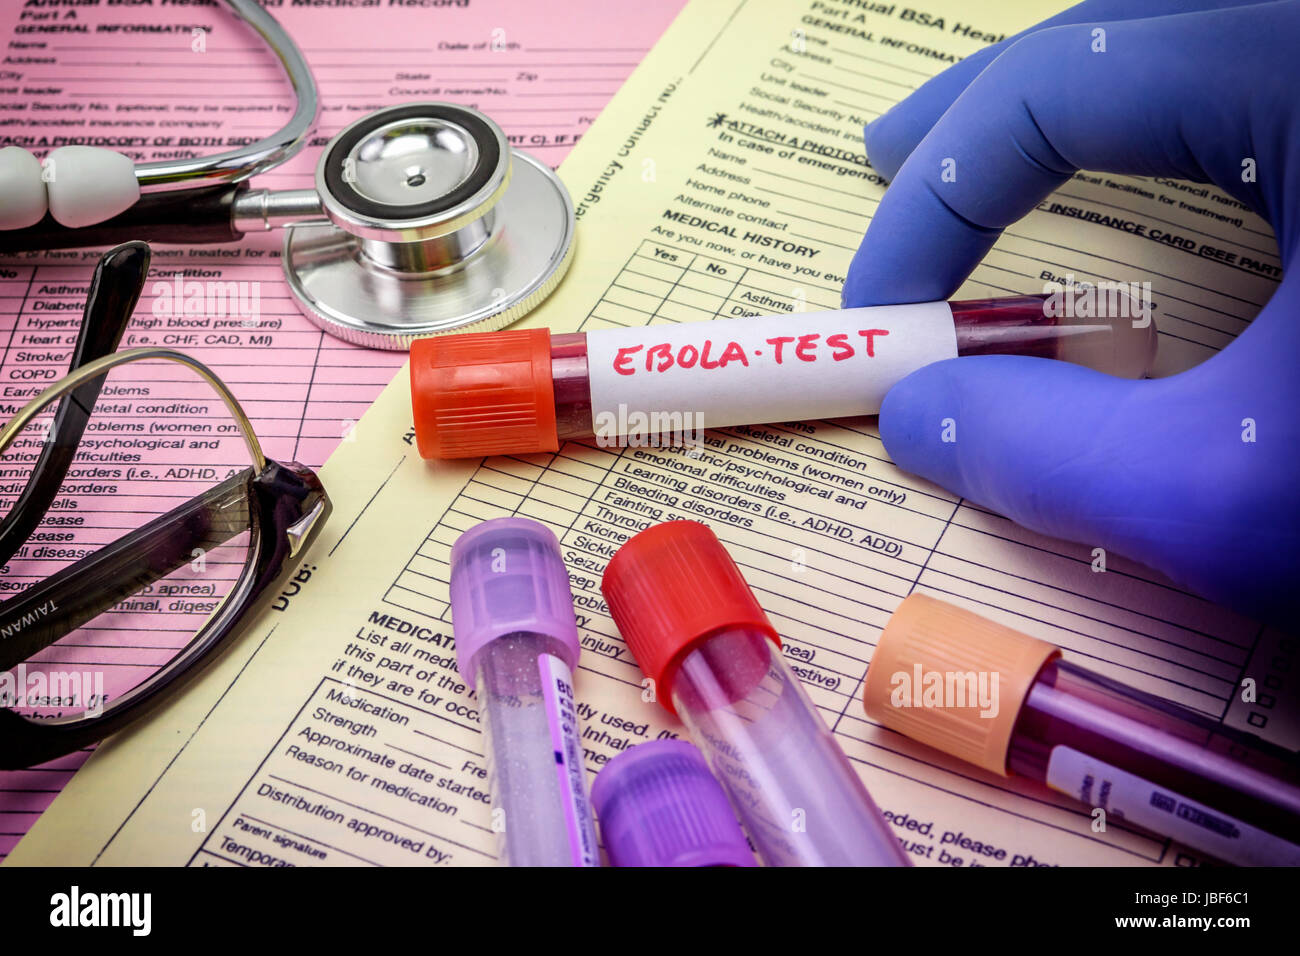 Tests For Research Of Ebola virus Doctor holding a vial of vaccine virus Ebola Stock Photo